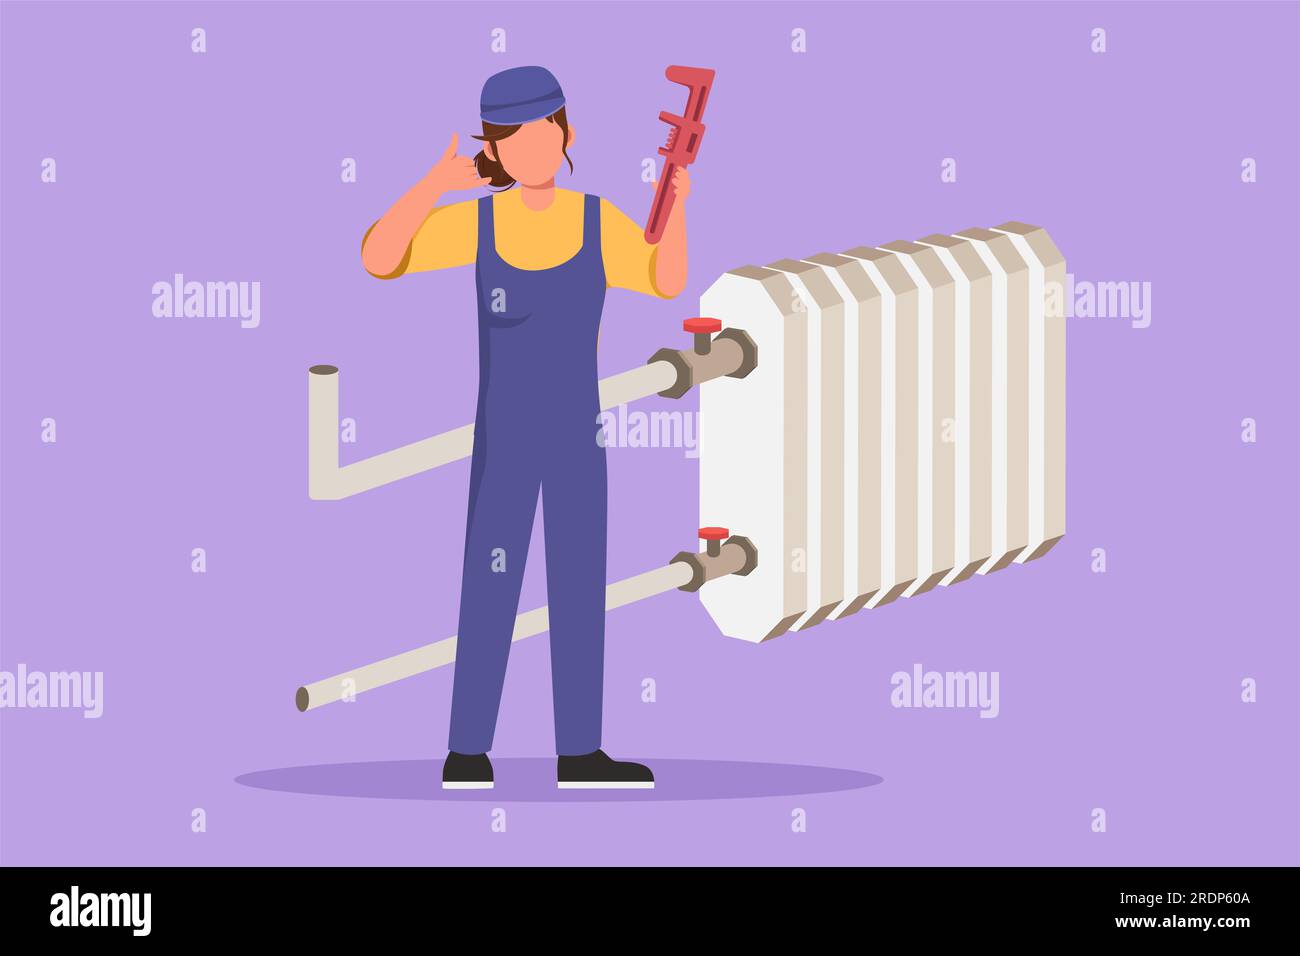 Cartoon flat style drawing of female plumber standing with call me gesture and holding carpentry tool ready to work fixing broken plumbing at home. Su Stock Photo